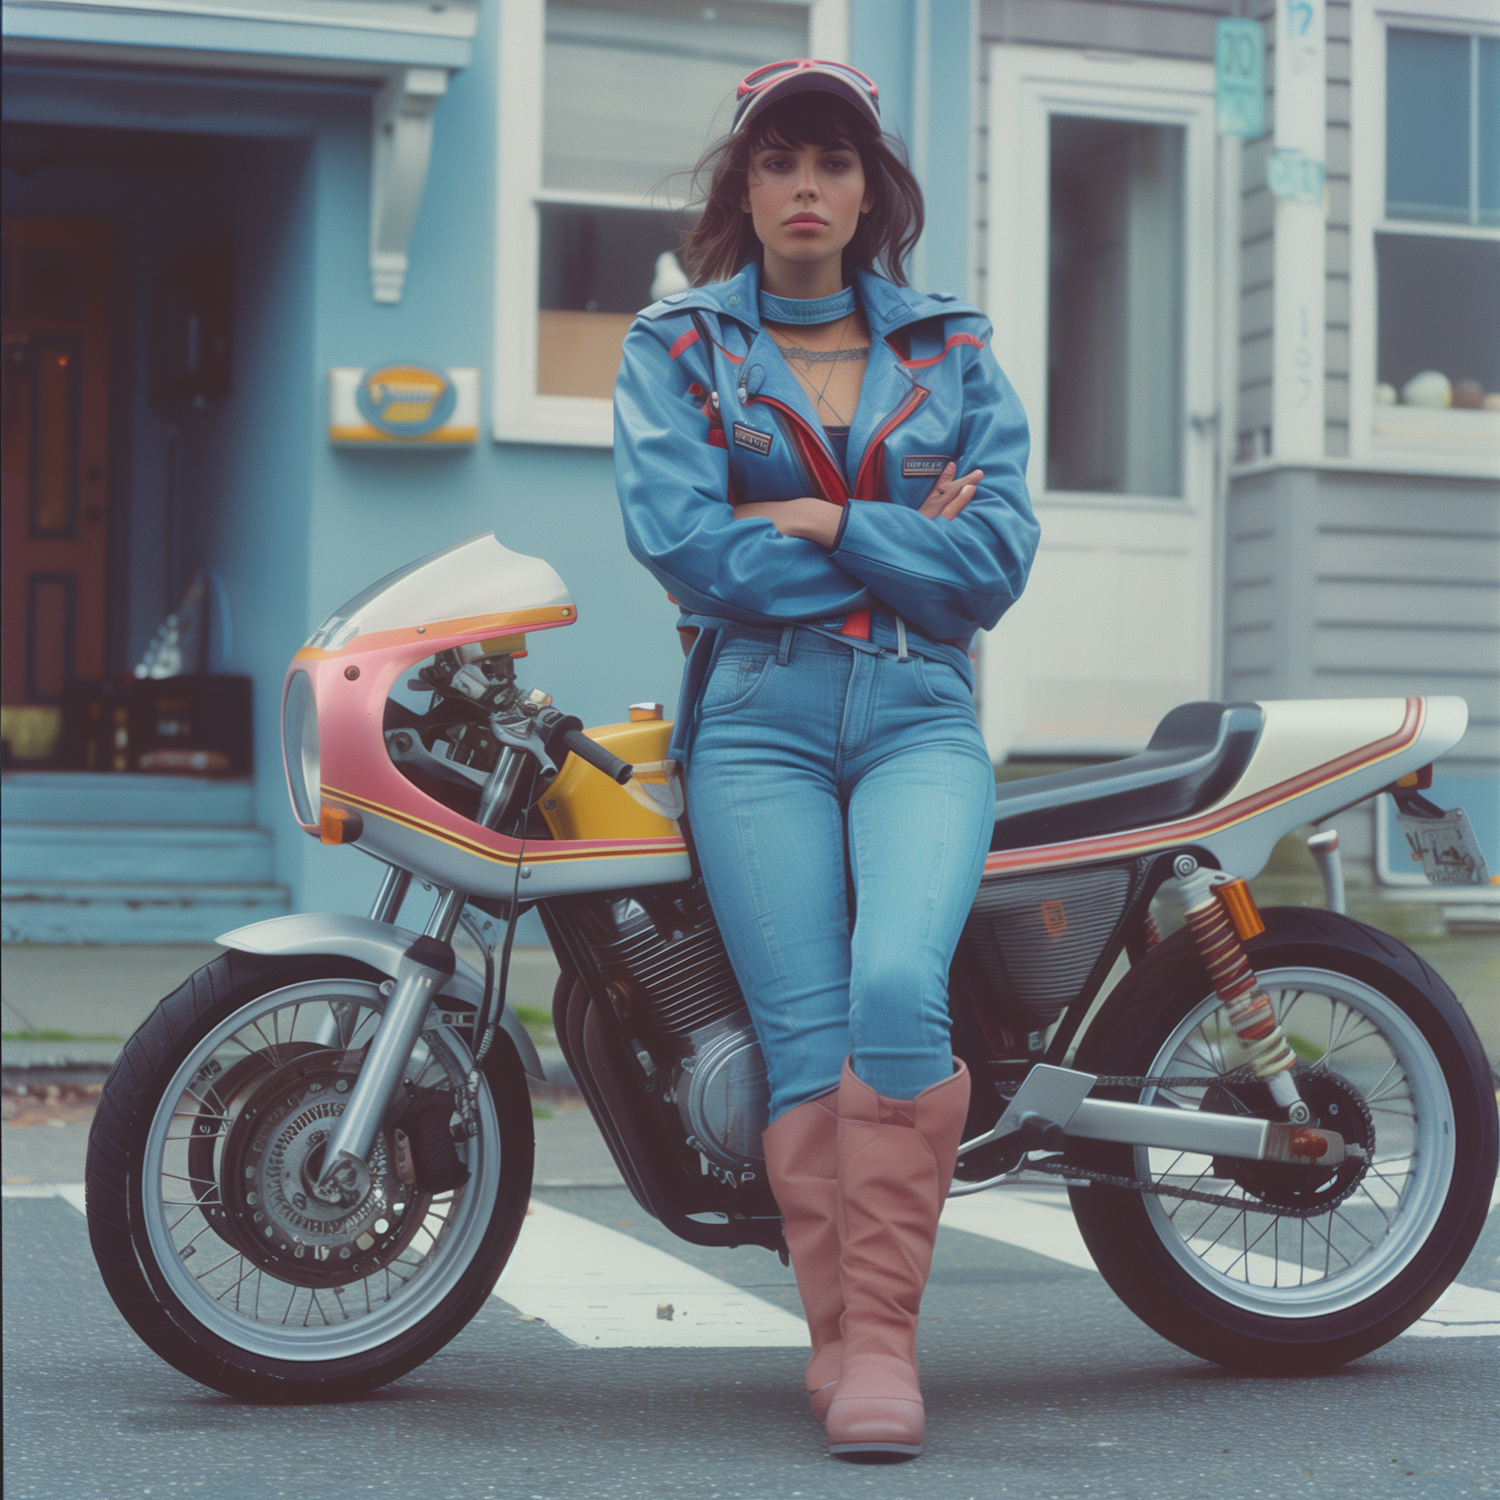 Confident Woman with Colorful Motorcycle on City Street